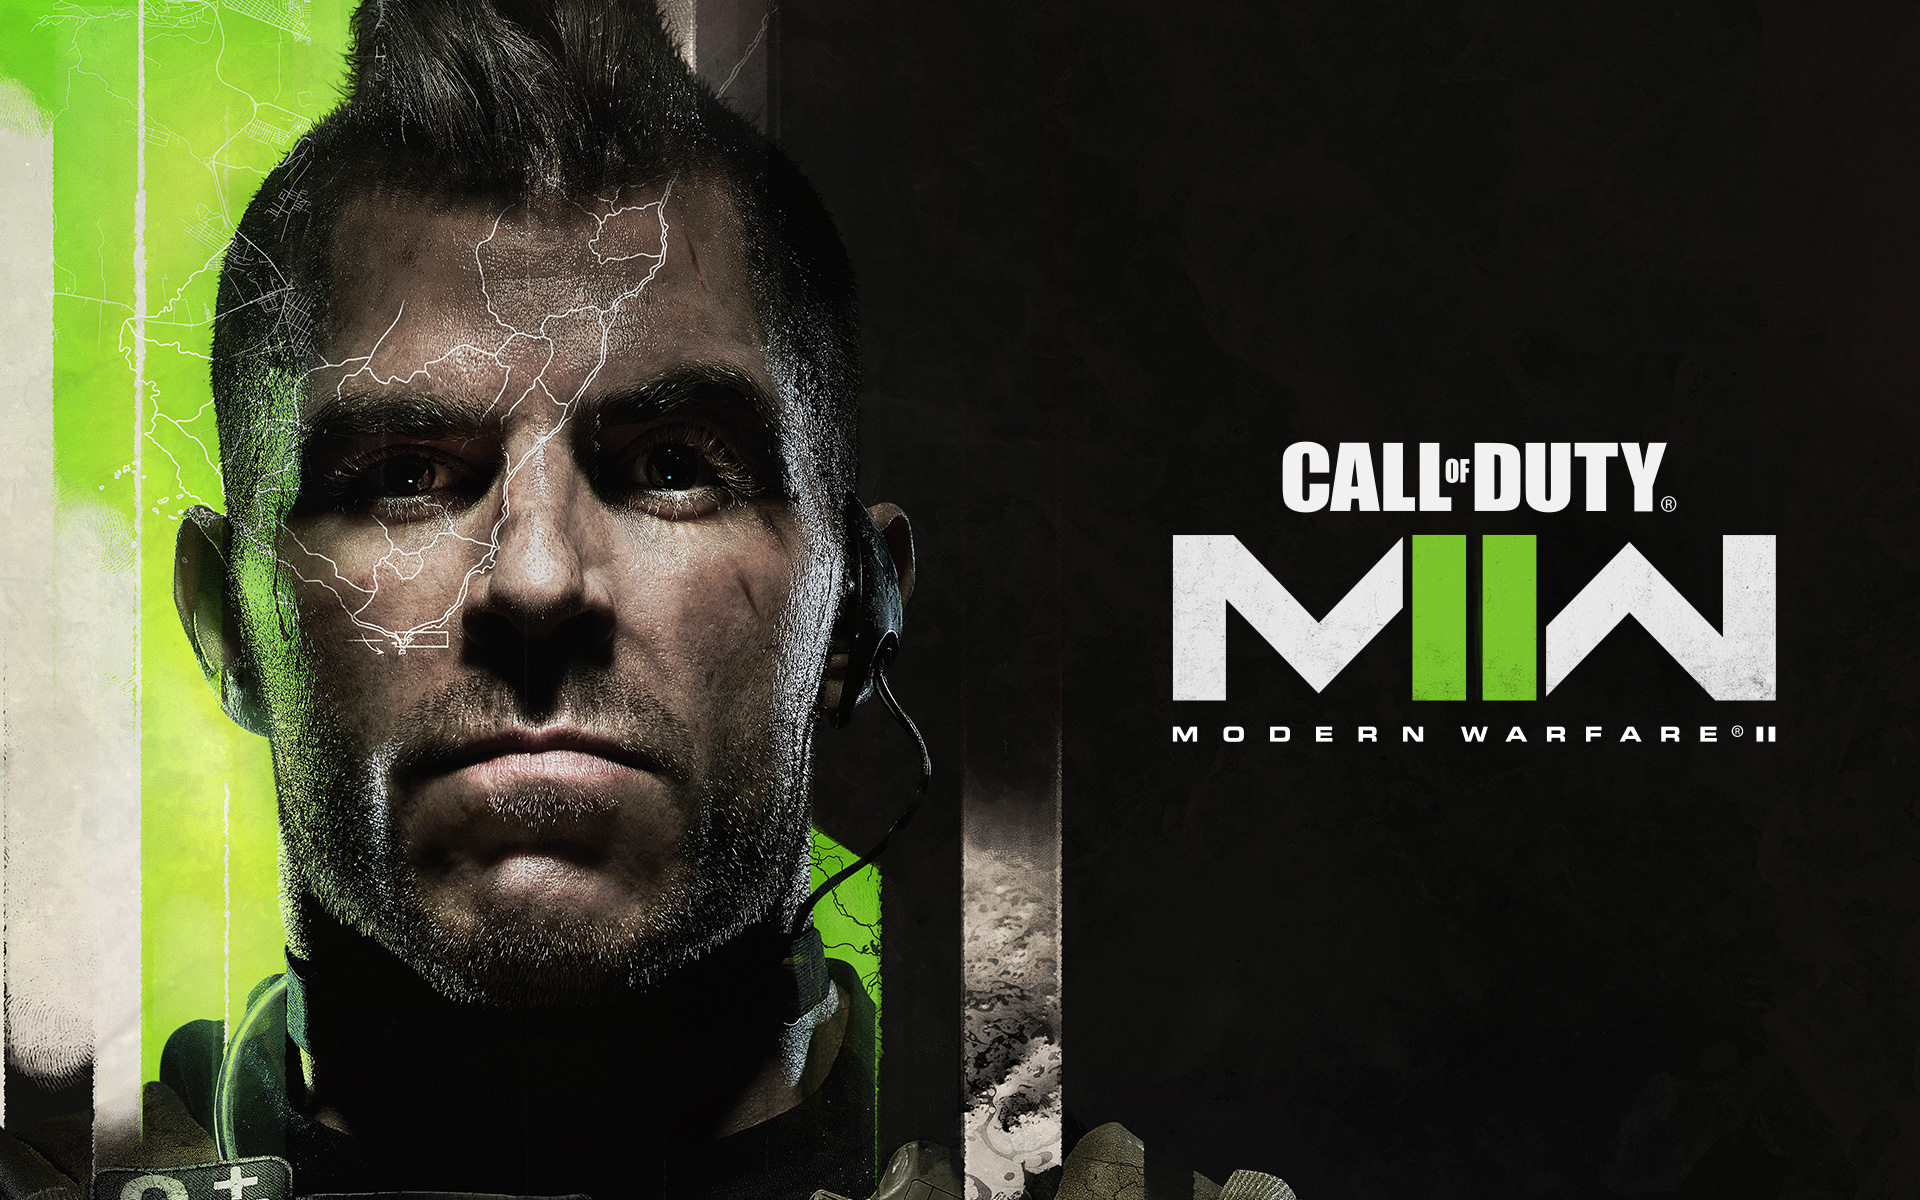 How to get Modern Warfare 2 beta codes by watching CDL Champs 2022